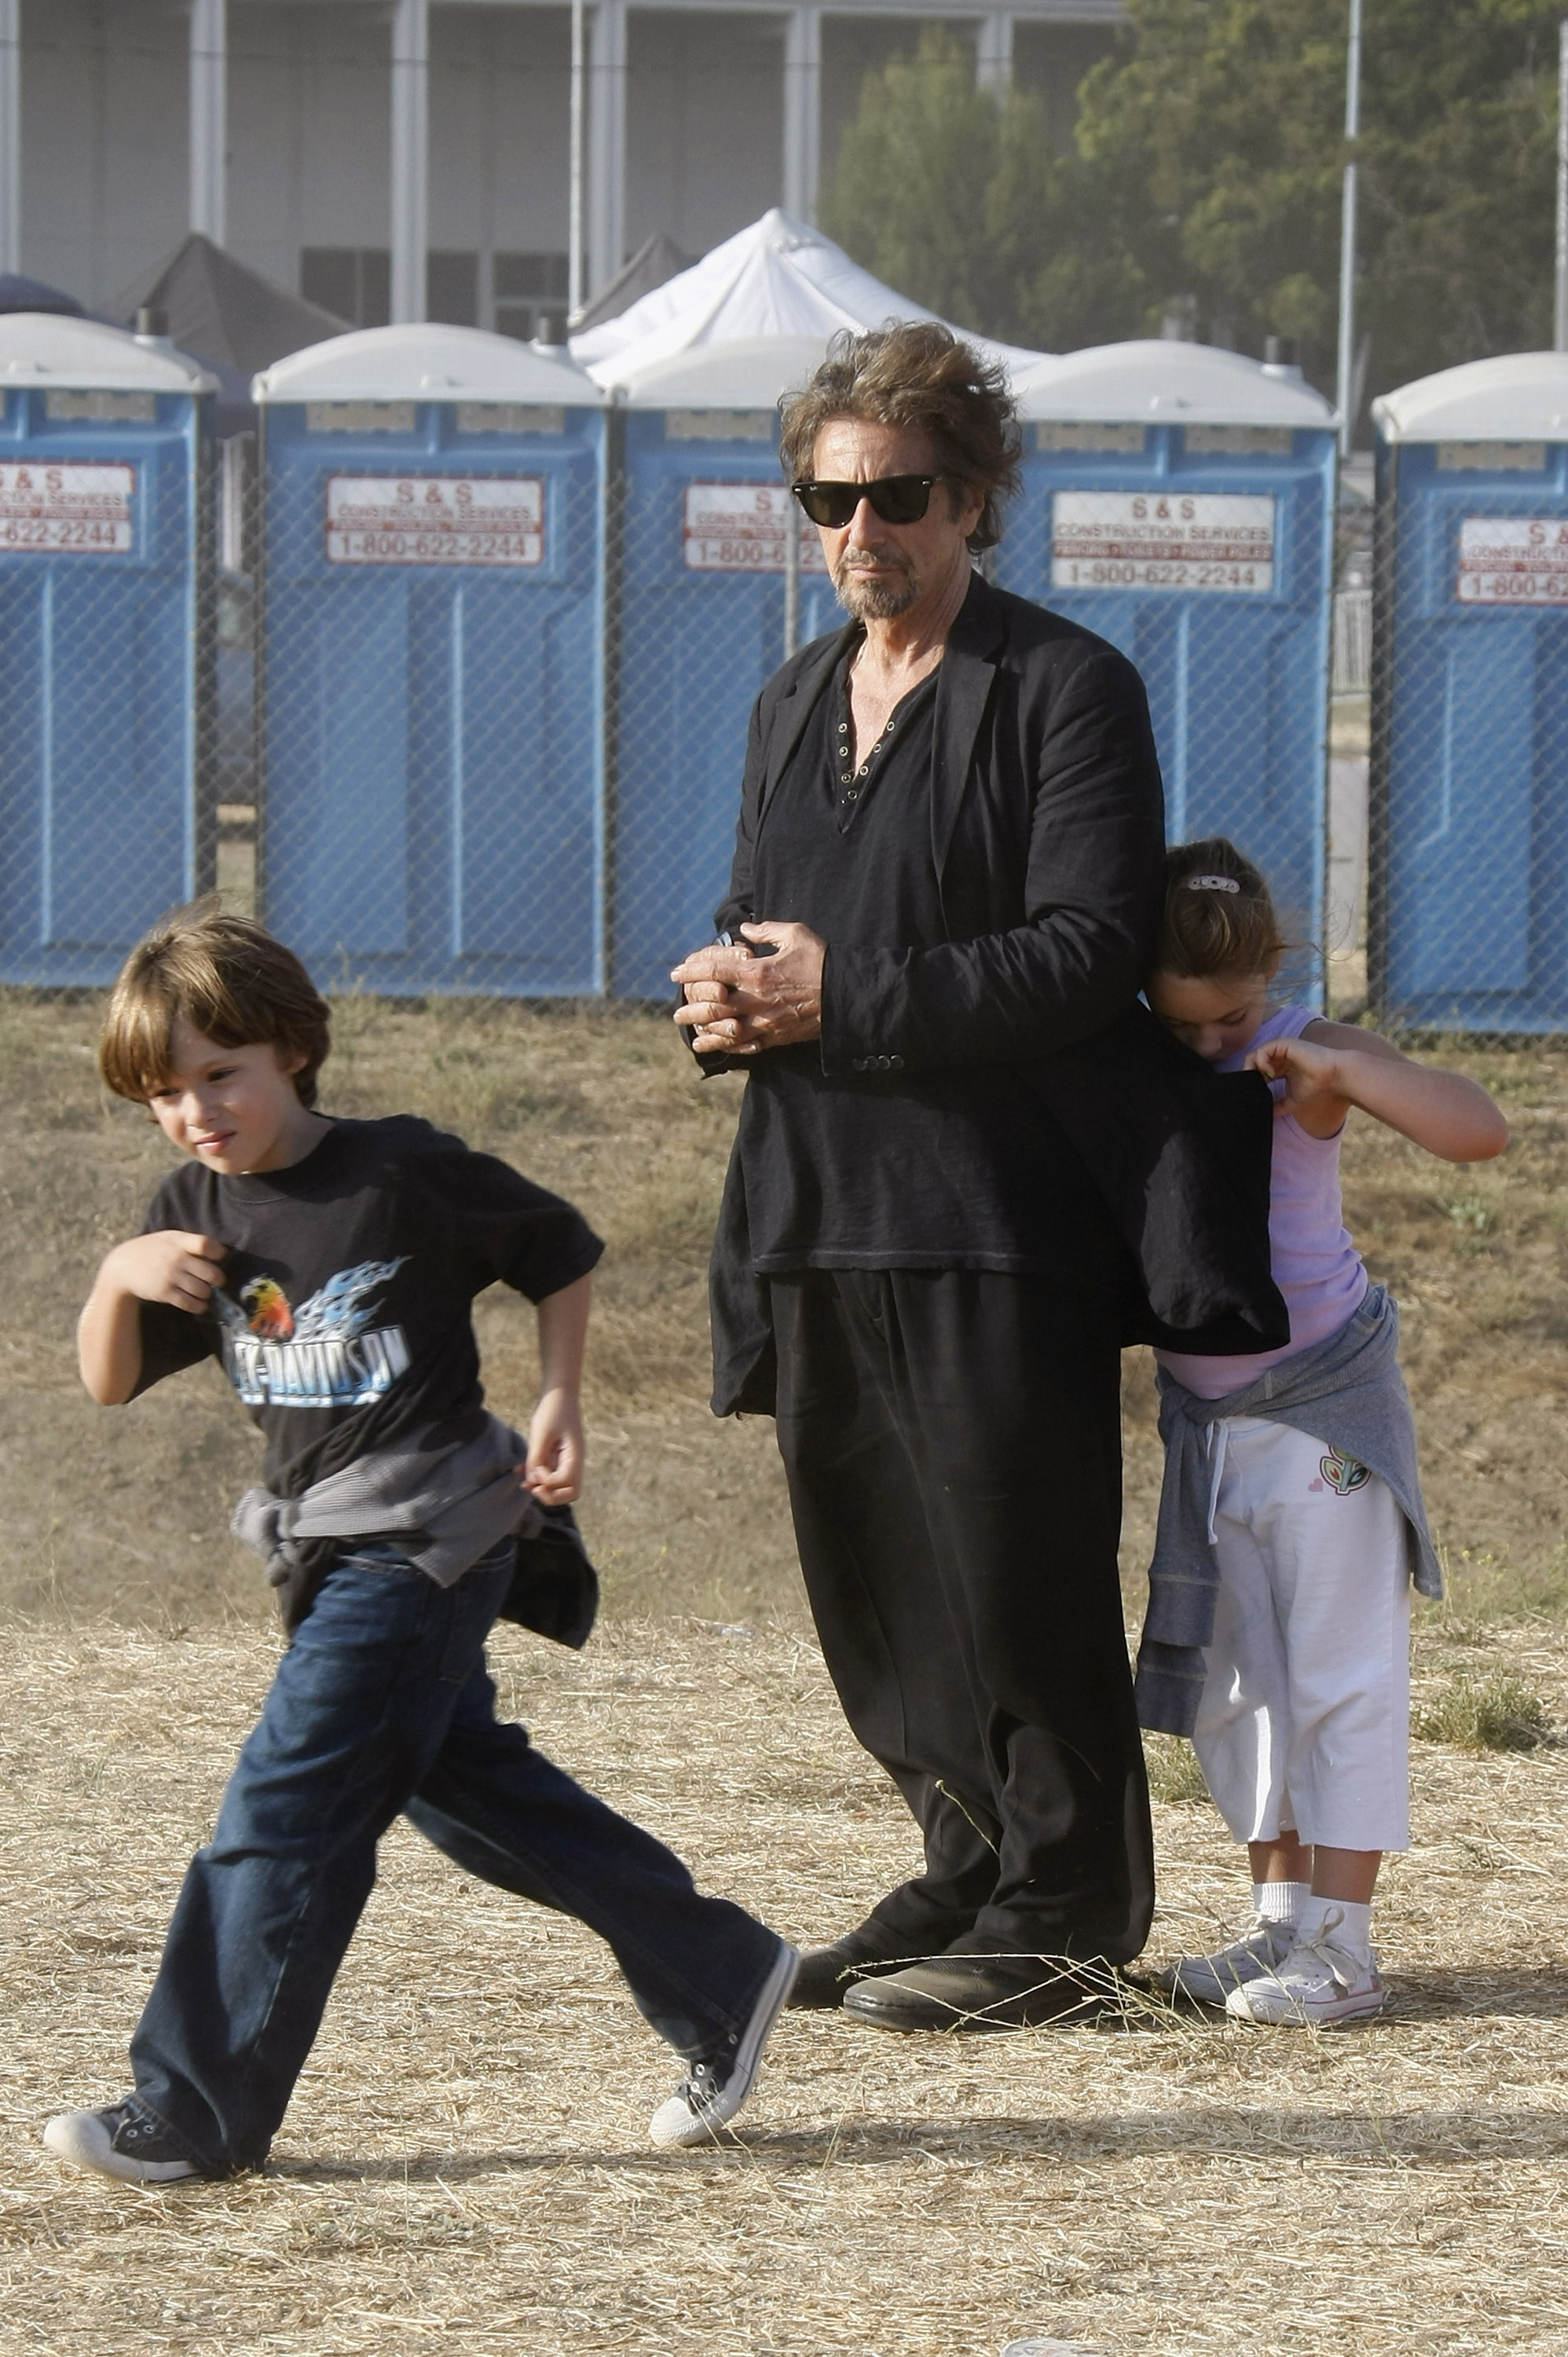 Al Pacino (C), his son Anton James (L) and his daughter Olivia Rose (R) are seen at the Malibu Fair on August 31, 2008 in Malibu, California | Source: Getty Images